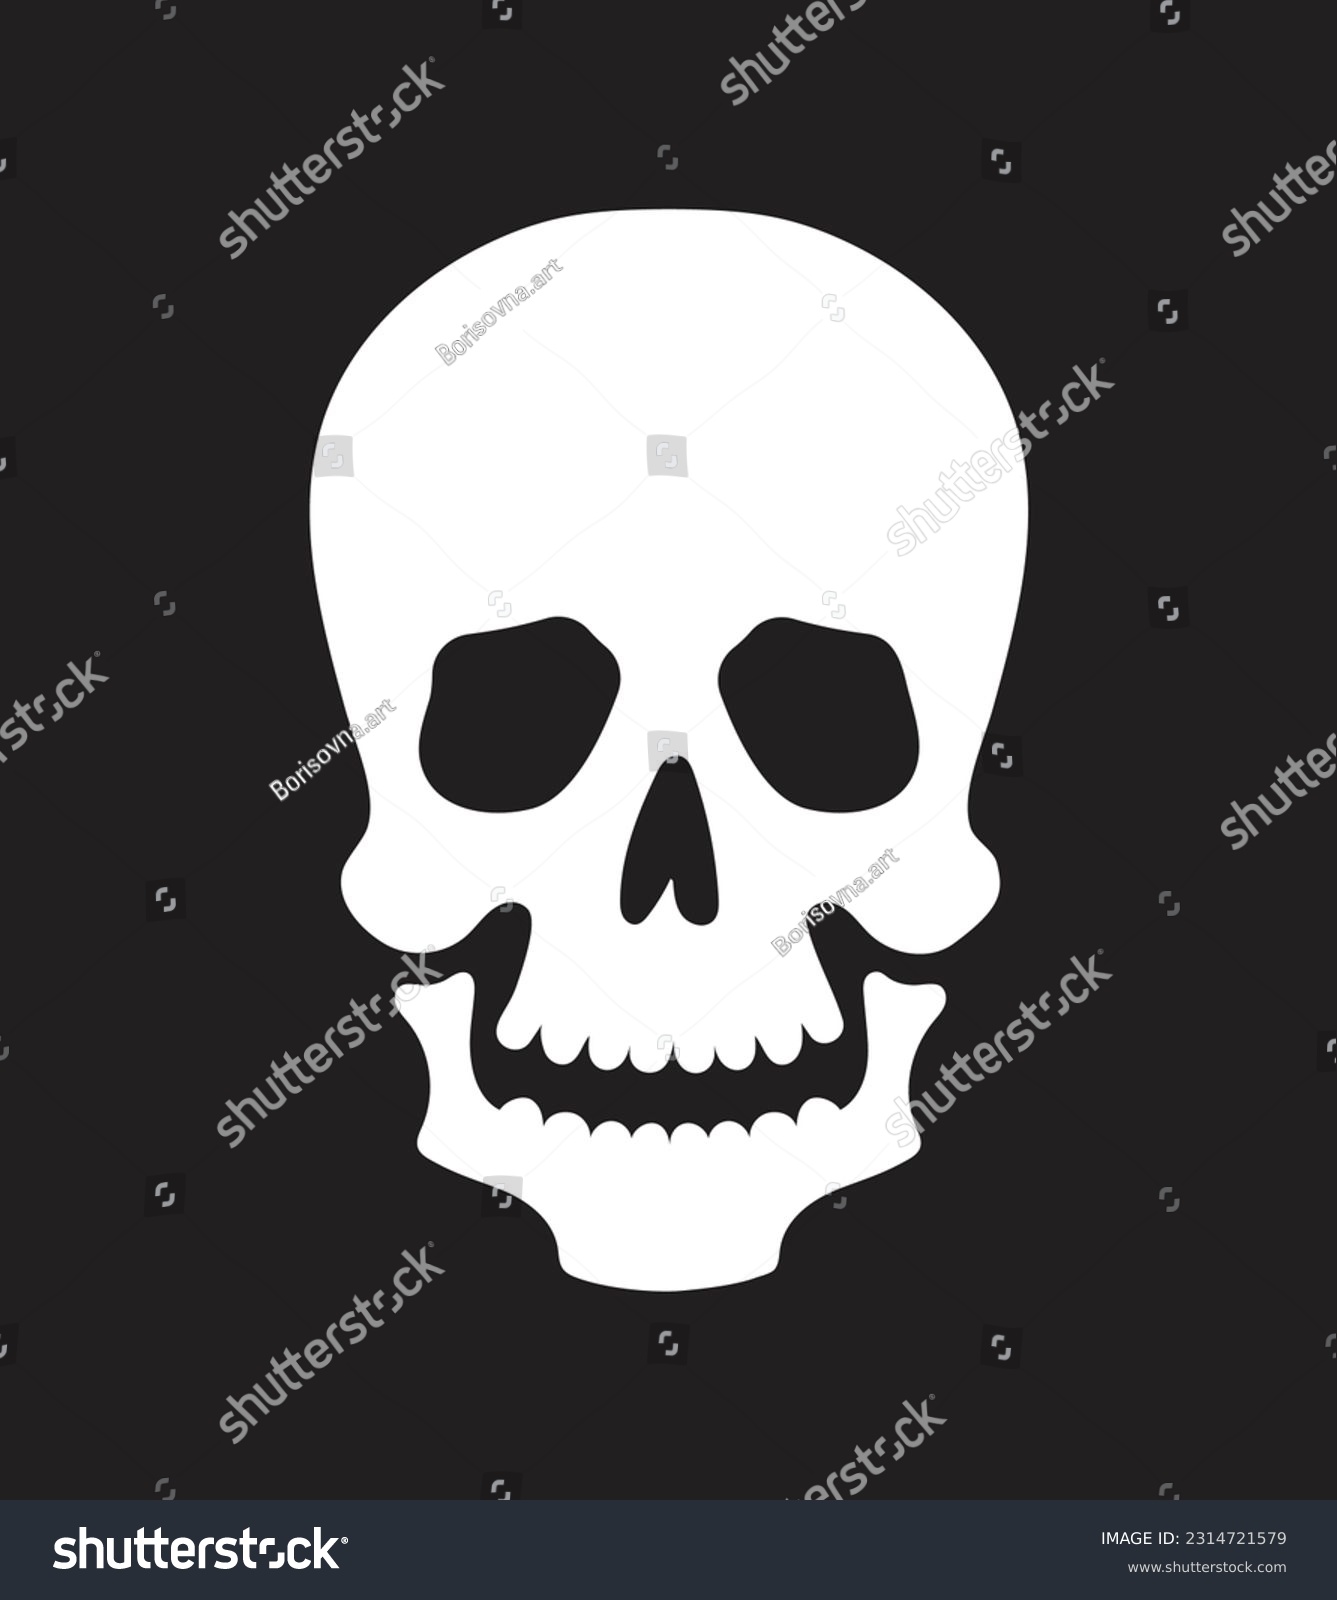 Skull stencil images stock photos d objects vectors